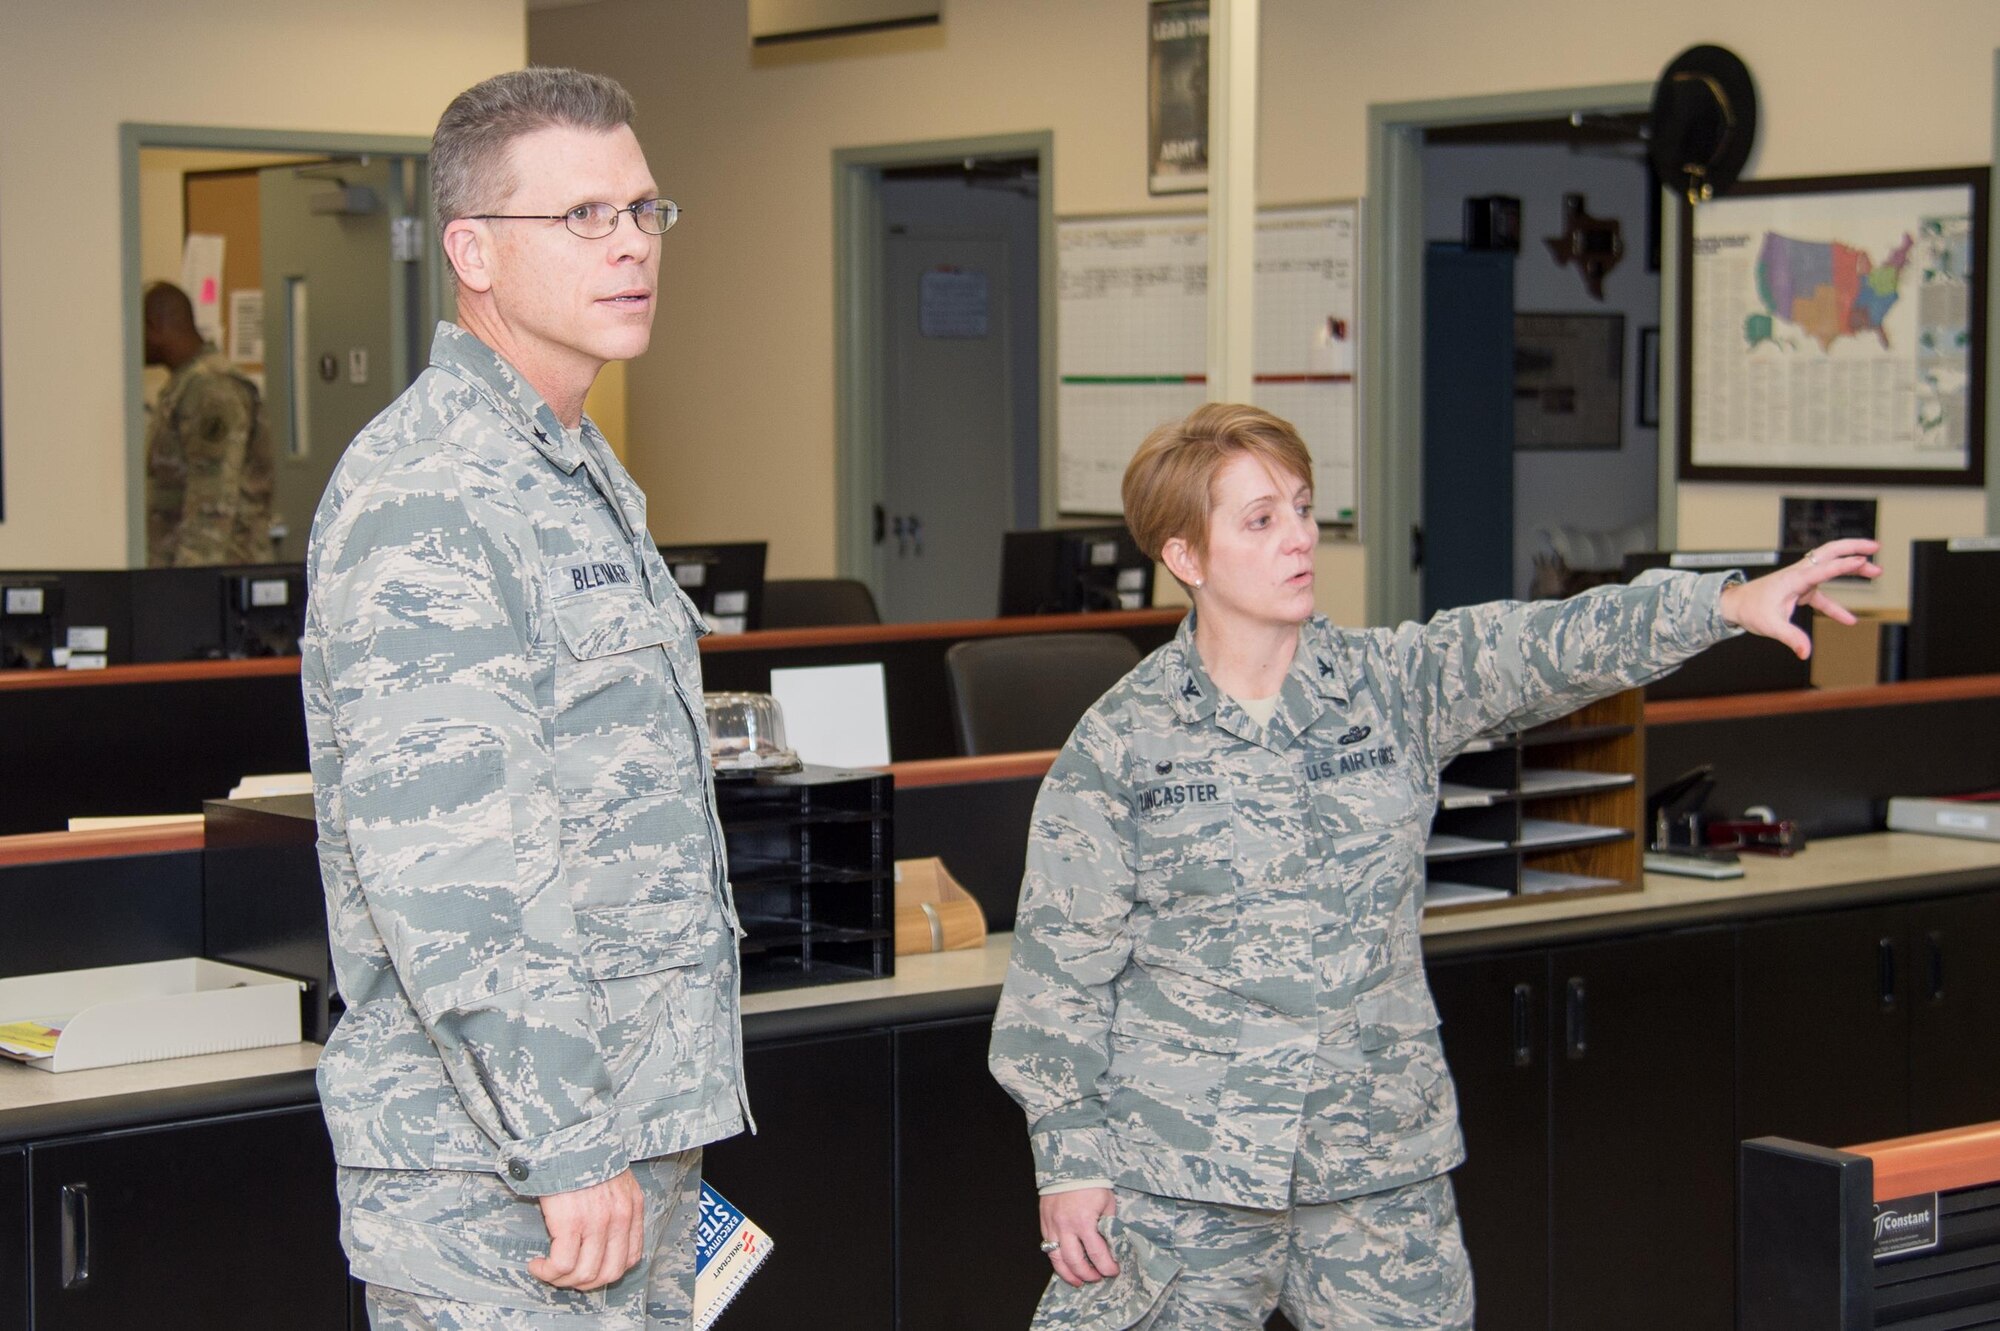 Col. Dawn Lancaster, Air Force Mortuary Affairs Operations commander, gives Brig. Gen. Steven Bleymaier, Director of Logistics, Engineering and Force Protection, Headquarters Air Mobility Command, a tour of the AFMAO command center Nov. 29, 2017, at Dover Air Force Base, Del.